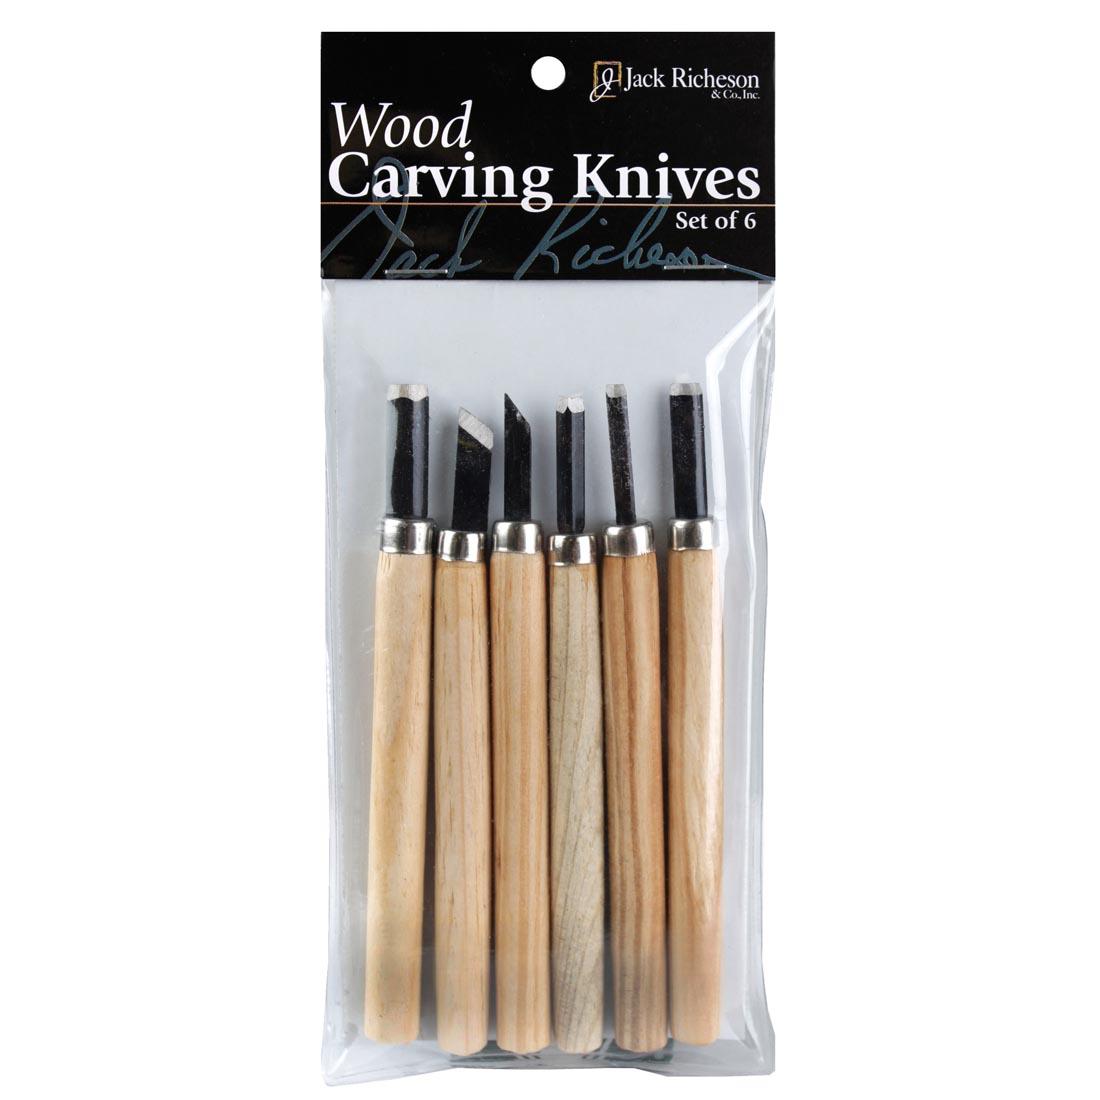 Richeson 6-Piece Wood Carving Knives Set